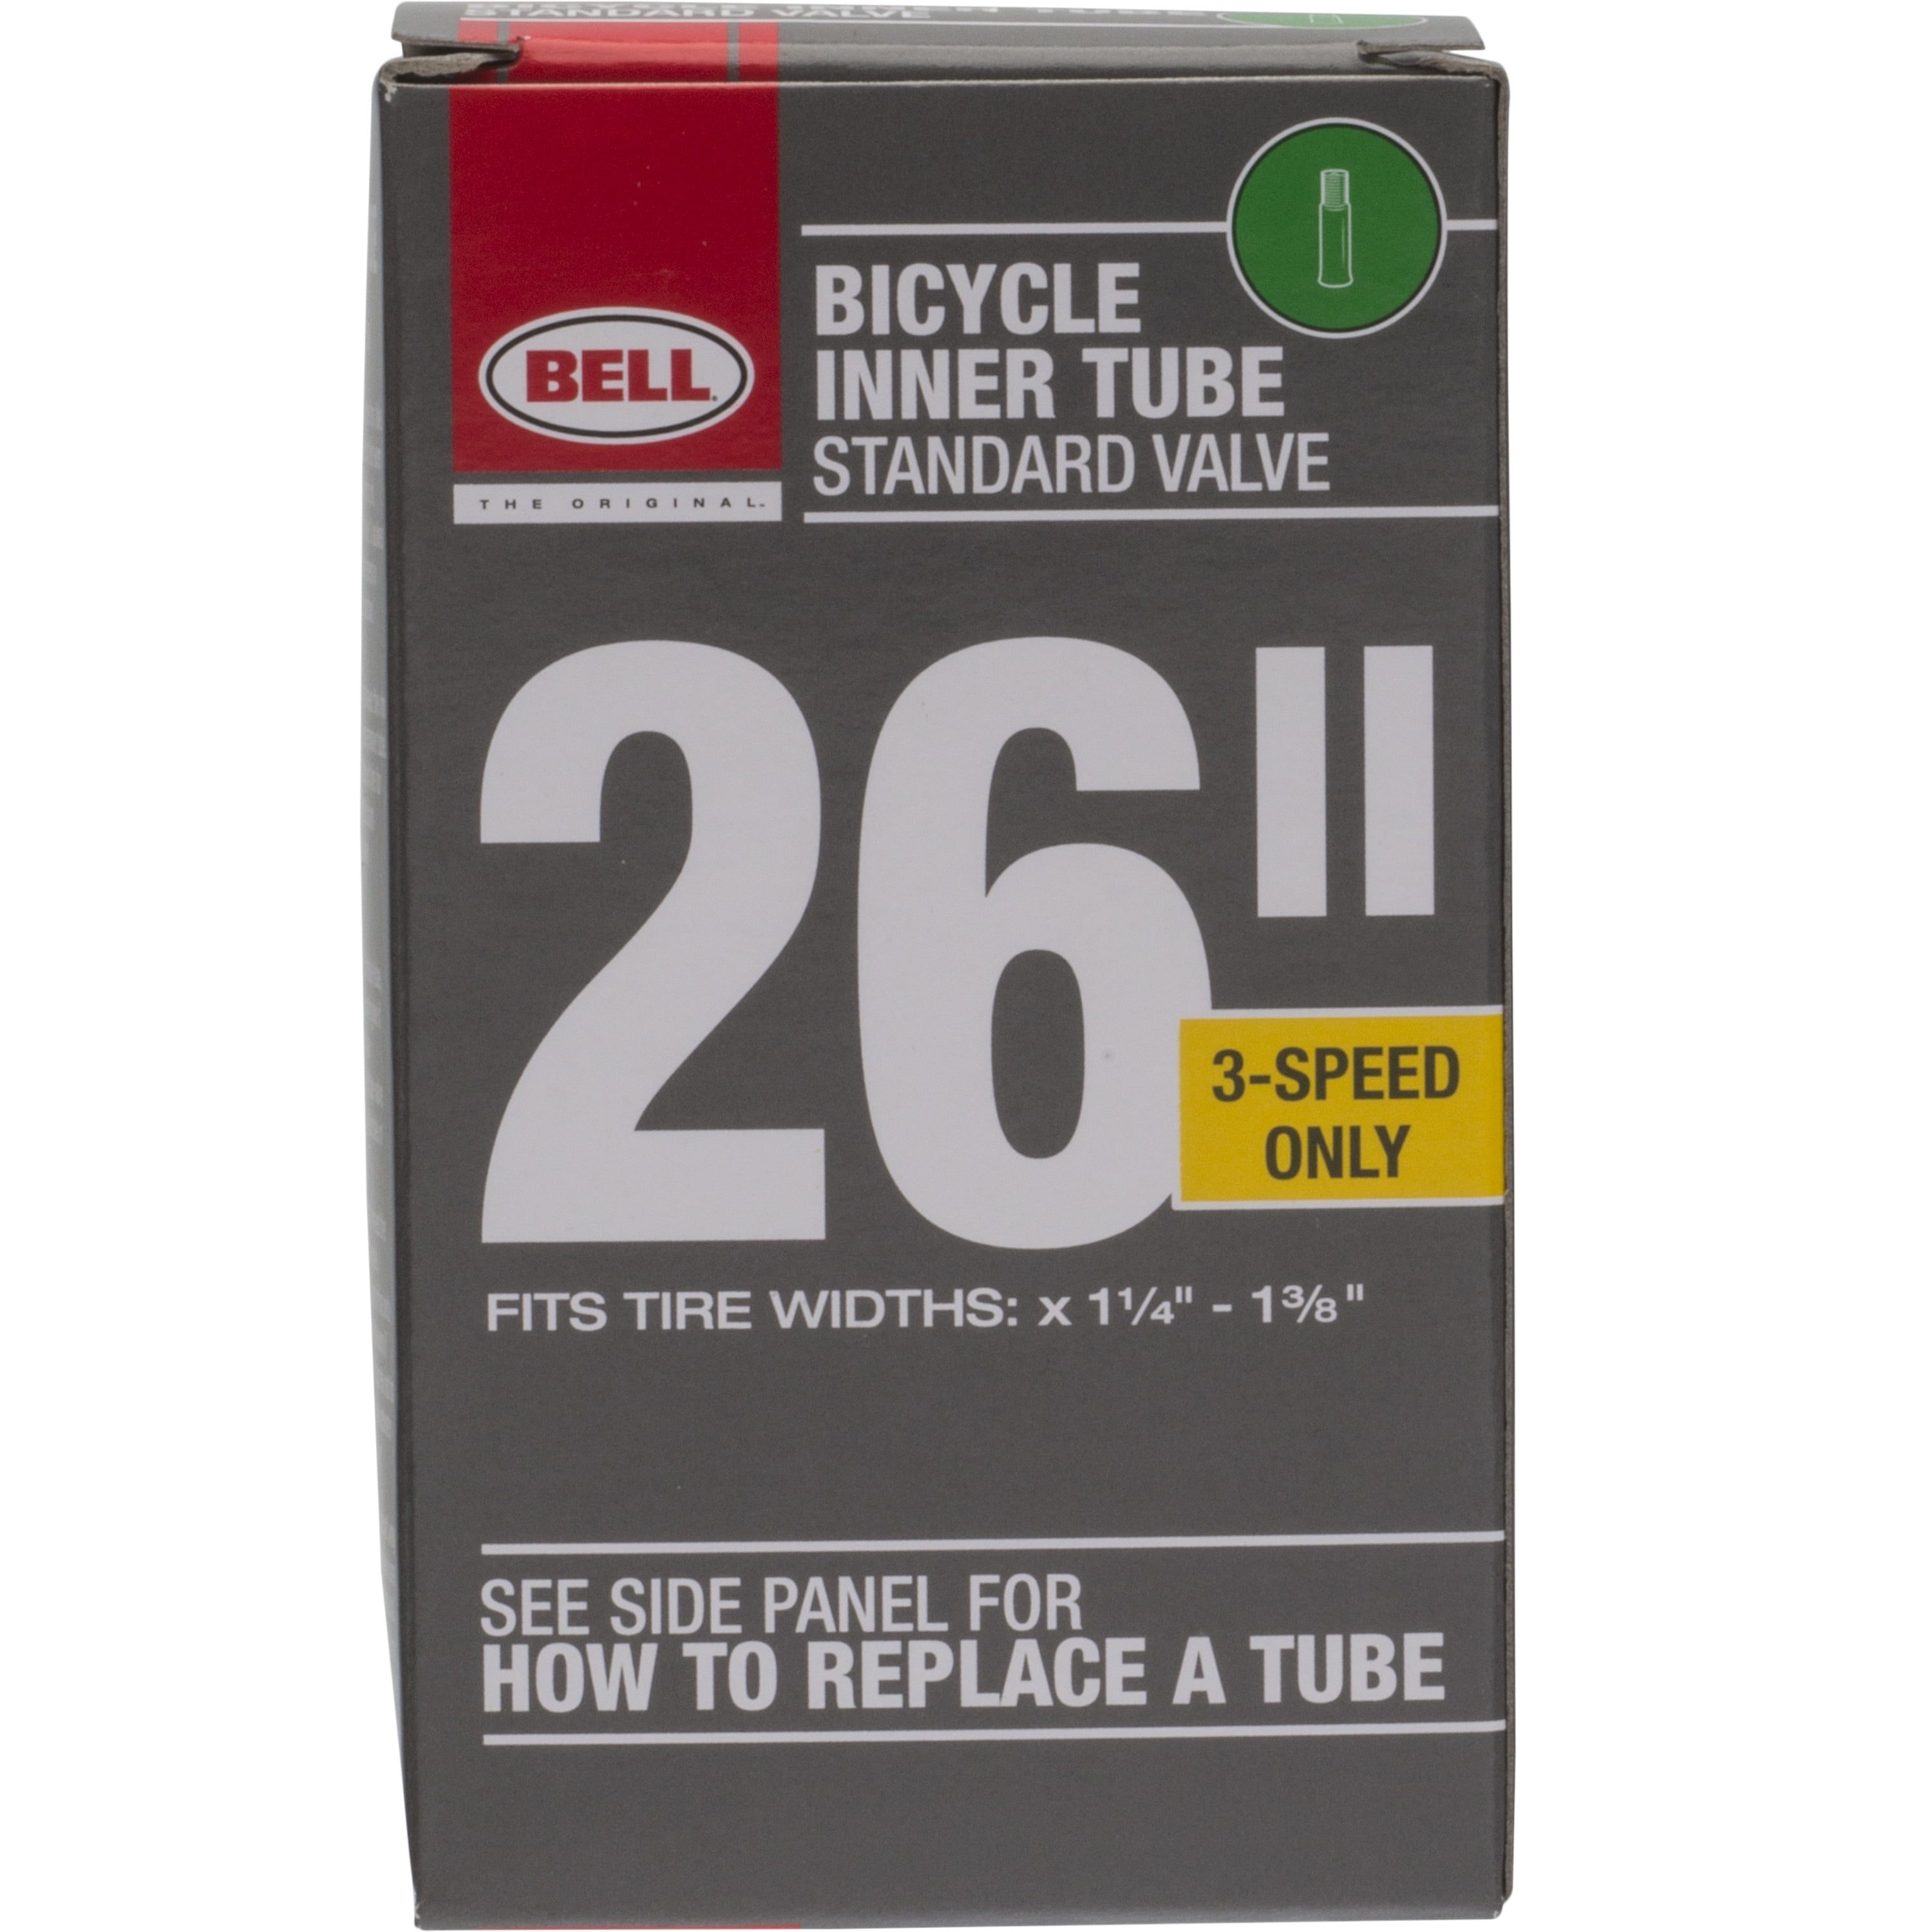 Details about   Bell Sports 7015384 Standard Schrader Bicycle Inner Tube 26 x 1.75-2.25 in. 